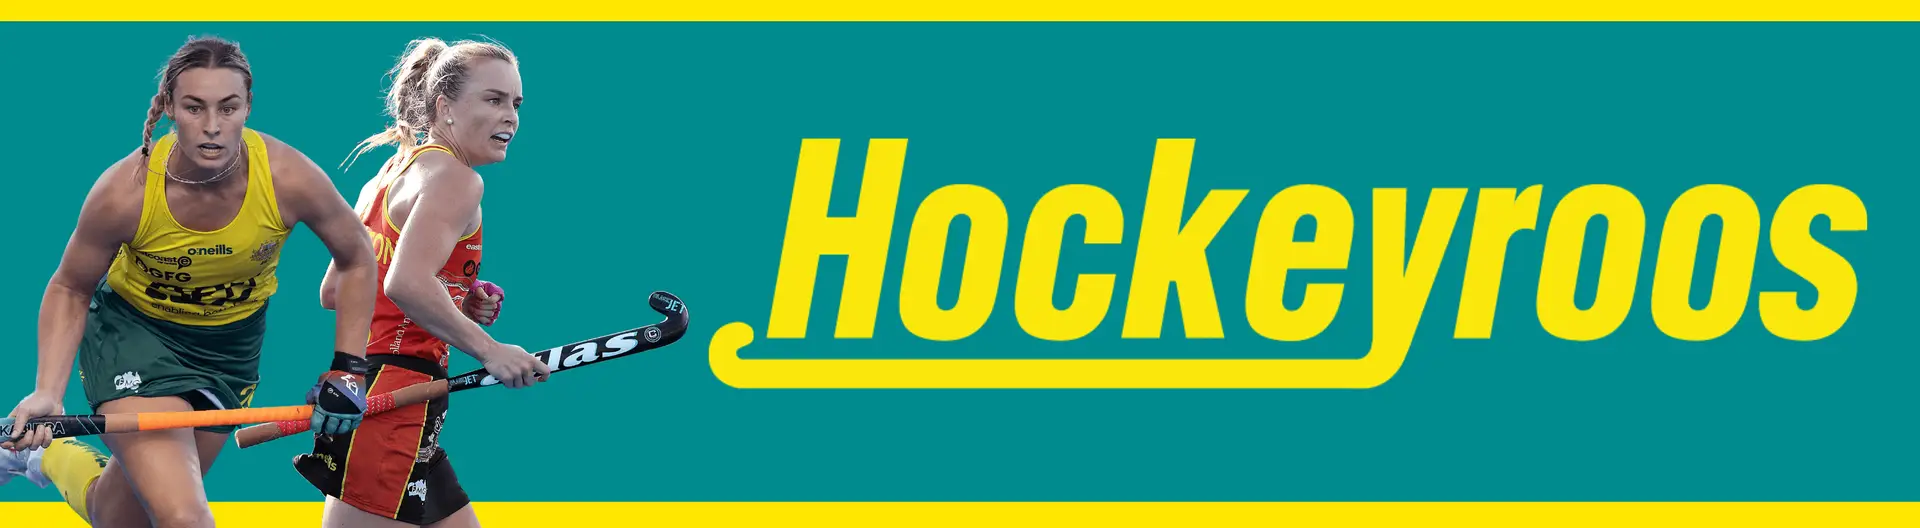 australia history making kookaburras and hockeyroos announced for paris 2024 olympic games 6685d4f3a2190 - Australia: History-making Kookaburras and Hockeyroos announced for Paris 2024 Olympic Games - Australia: